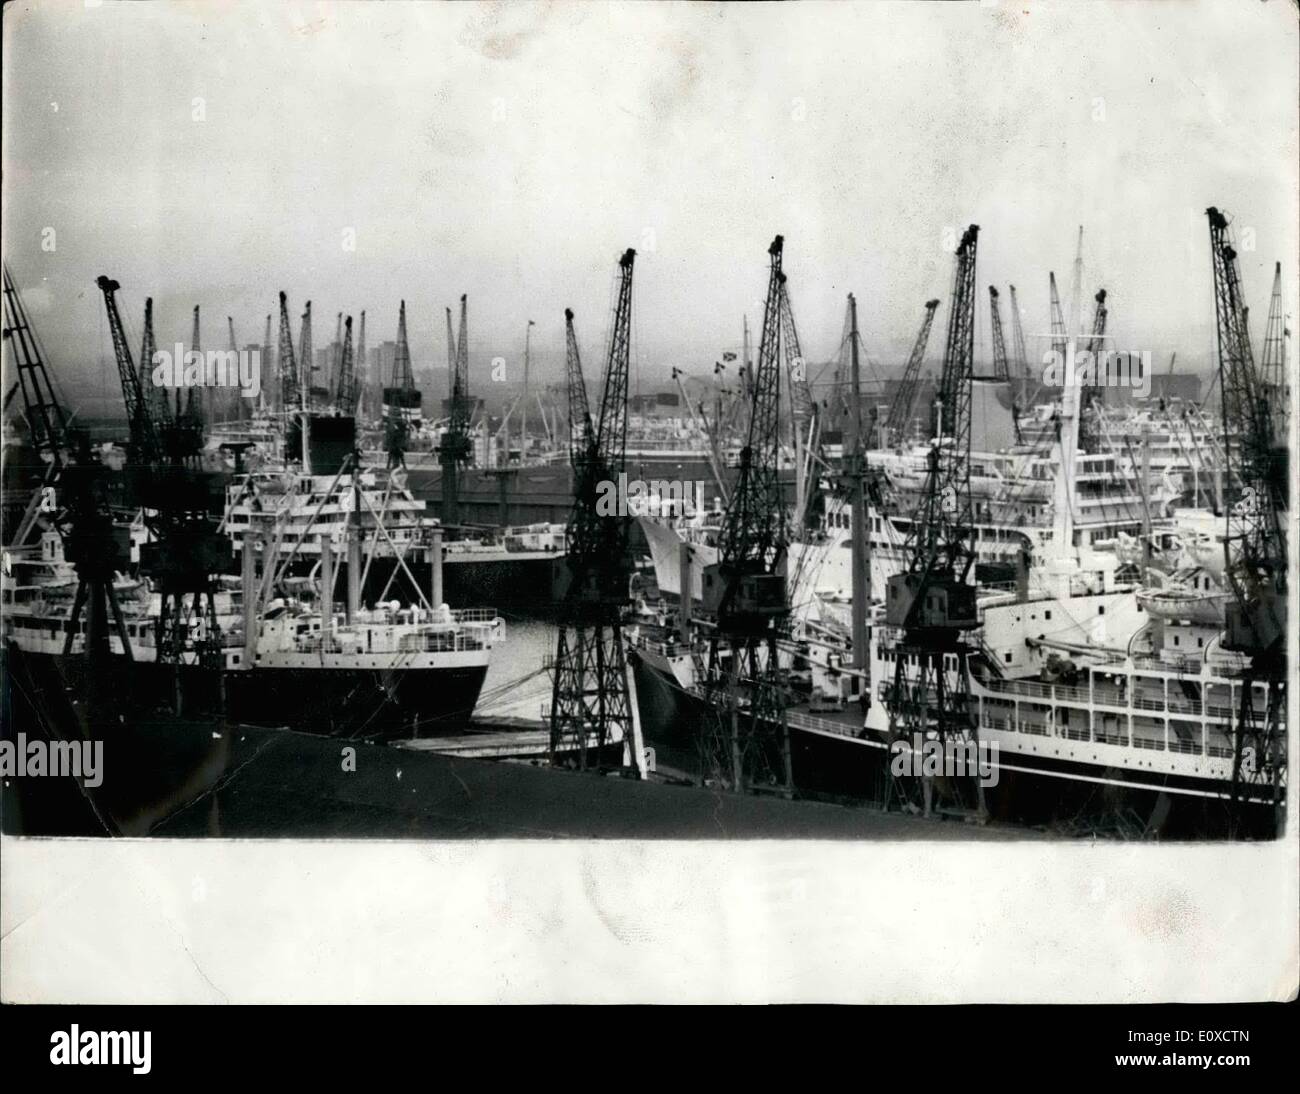 Jun. 06, 1966 - The 43rd. day of the Seamen's strike. Photo shows today is the 43rd day of the Seamen's strike - this picture taken today shown name of the ships in London's King George V. and royal Albert Docks. Stock Photo